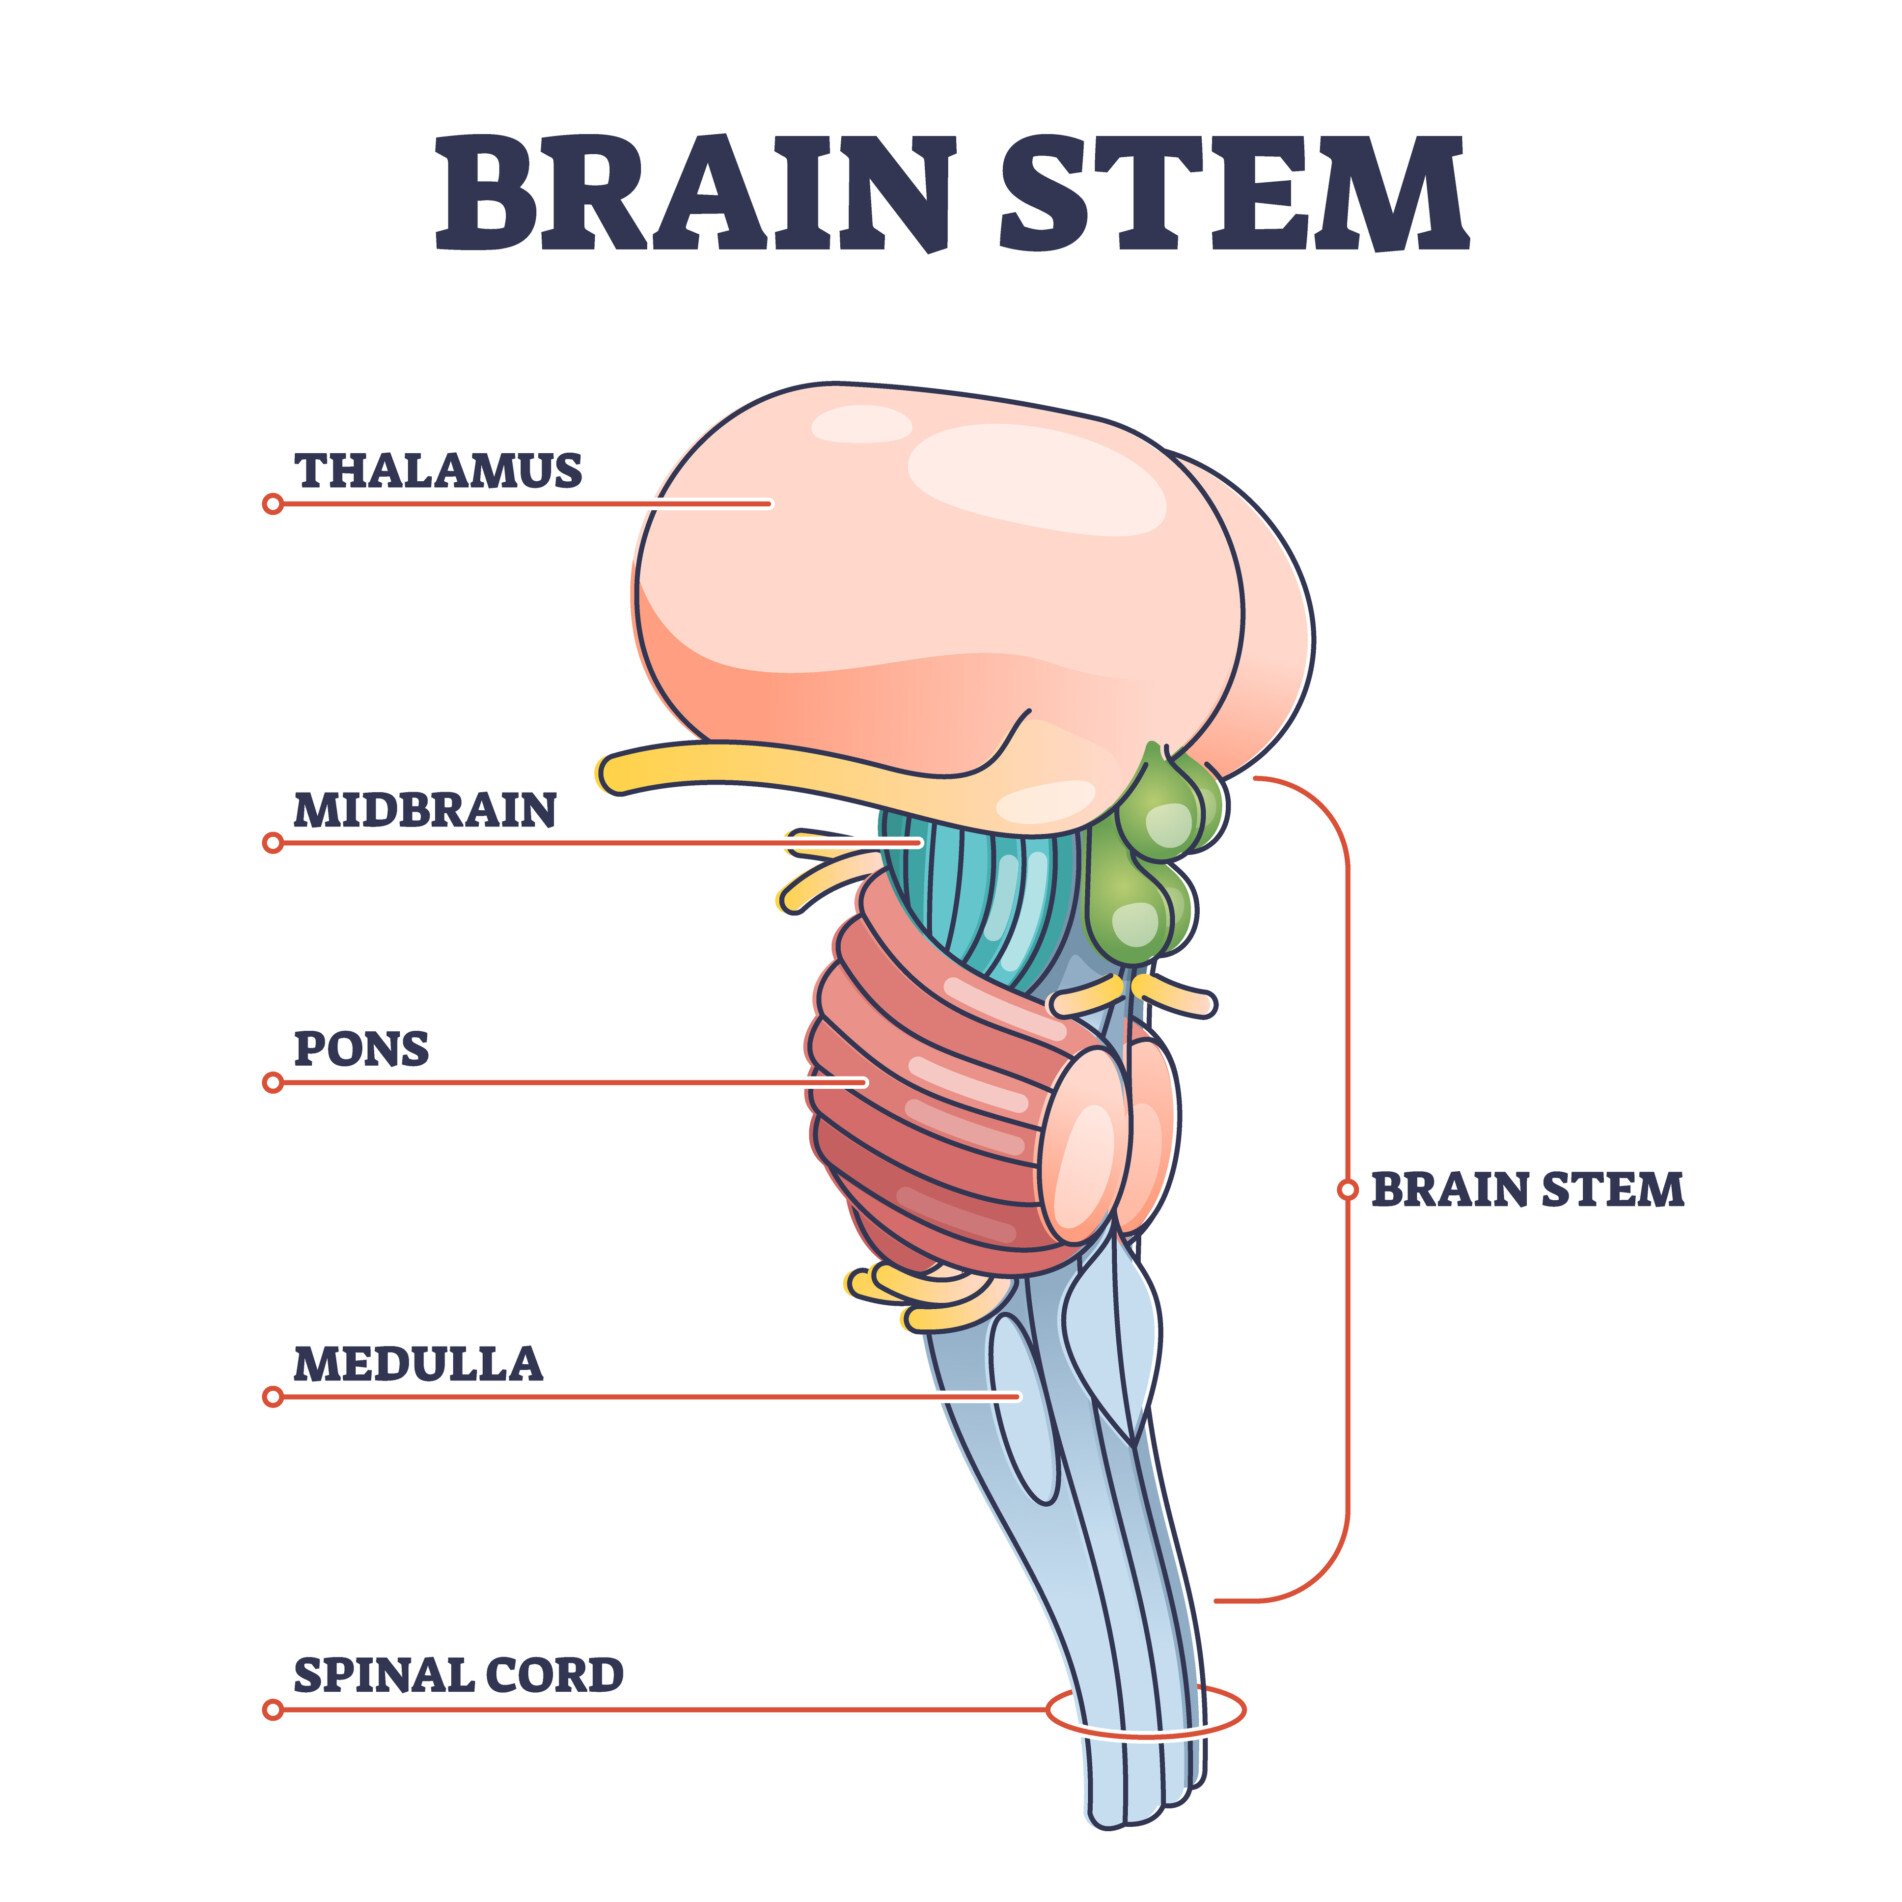 A diagram of the brain stem with the anatomical parts labelled: Thalamus, midbrain, pons, medulla and spinal cord